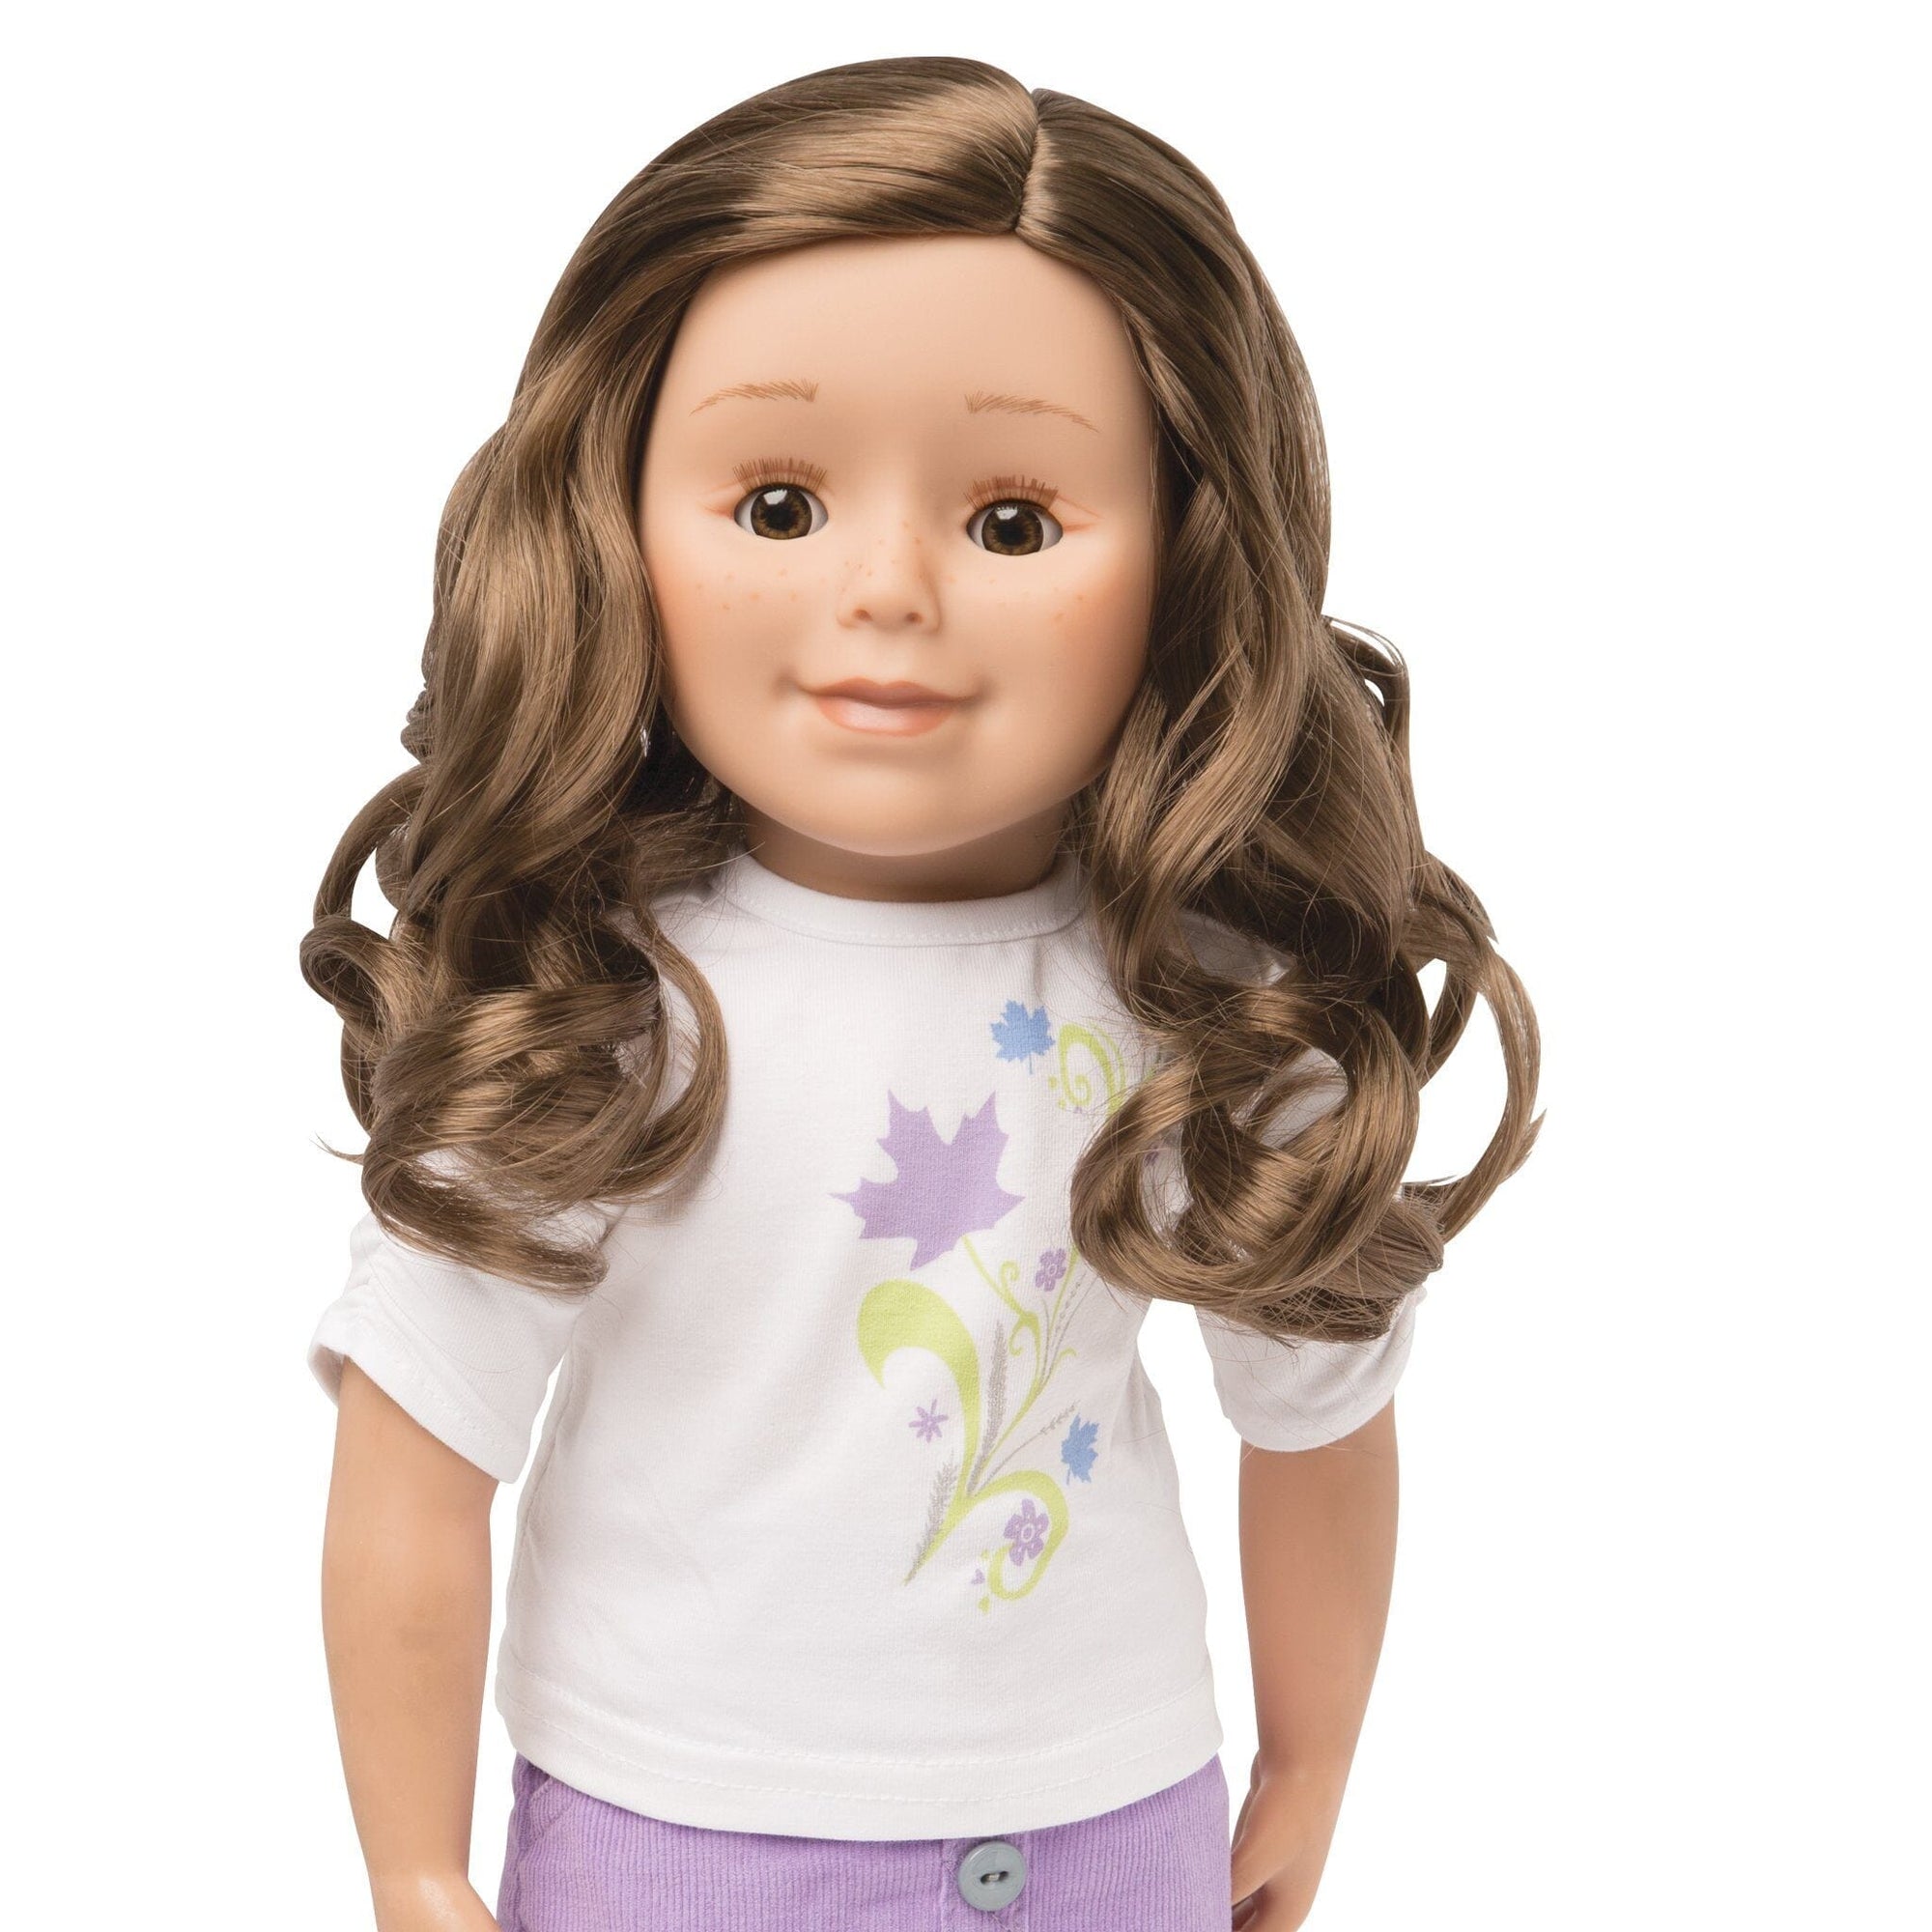 KMF27 Maplelea Friend 18 inch doll with long brown curly hair, medium-light skin, brown eyes and freckles